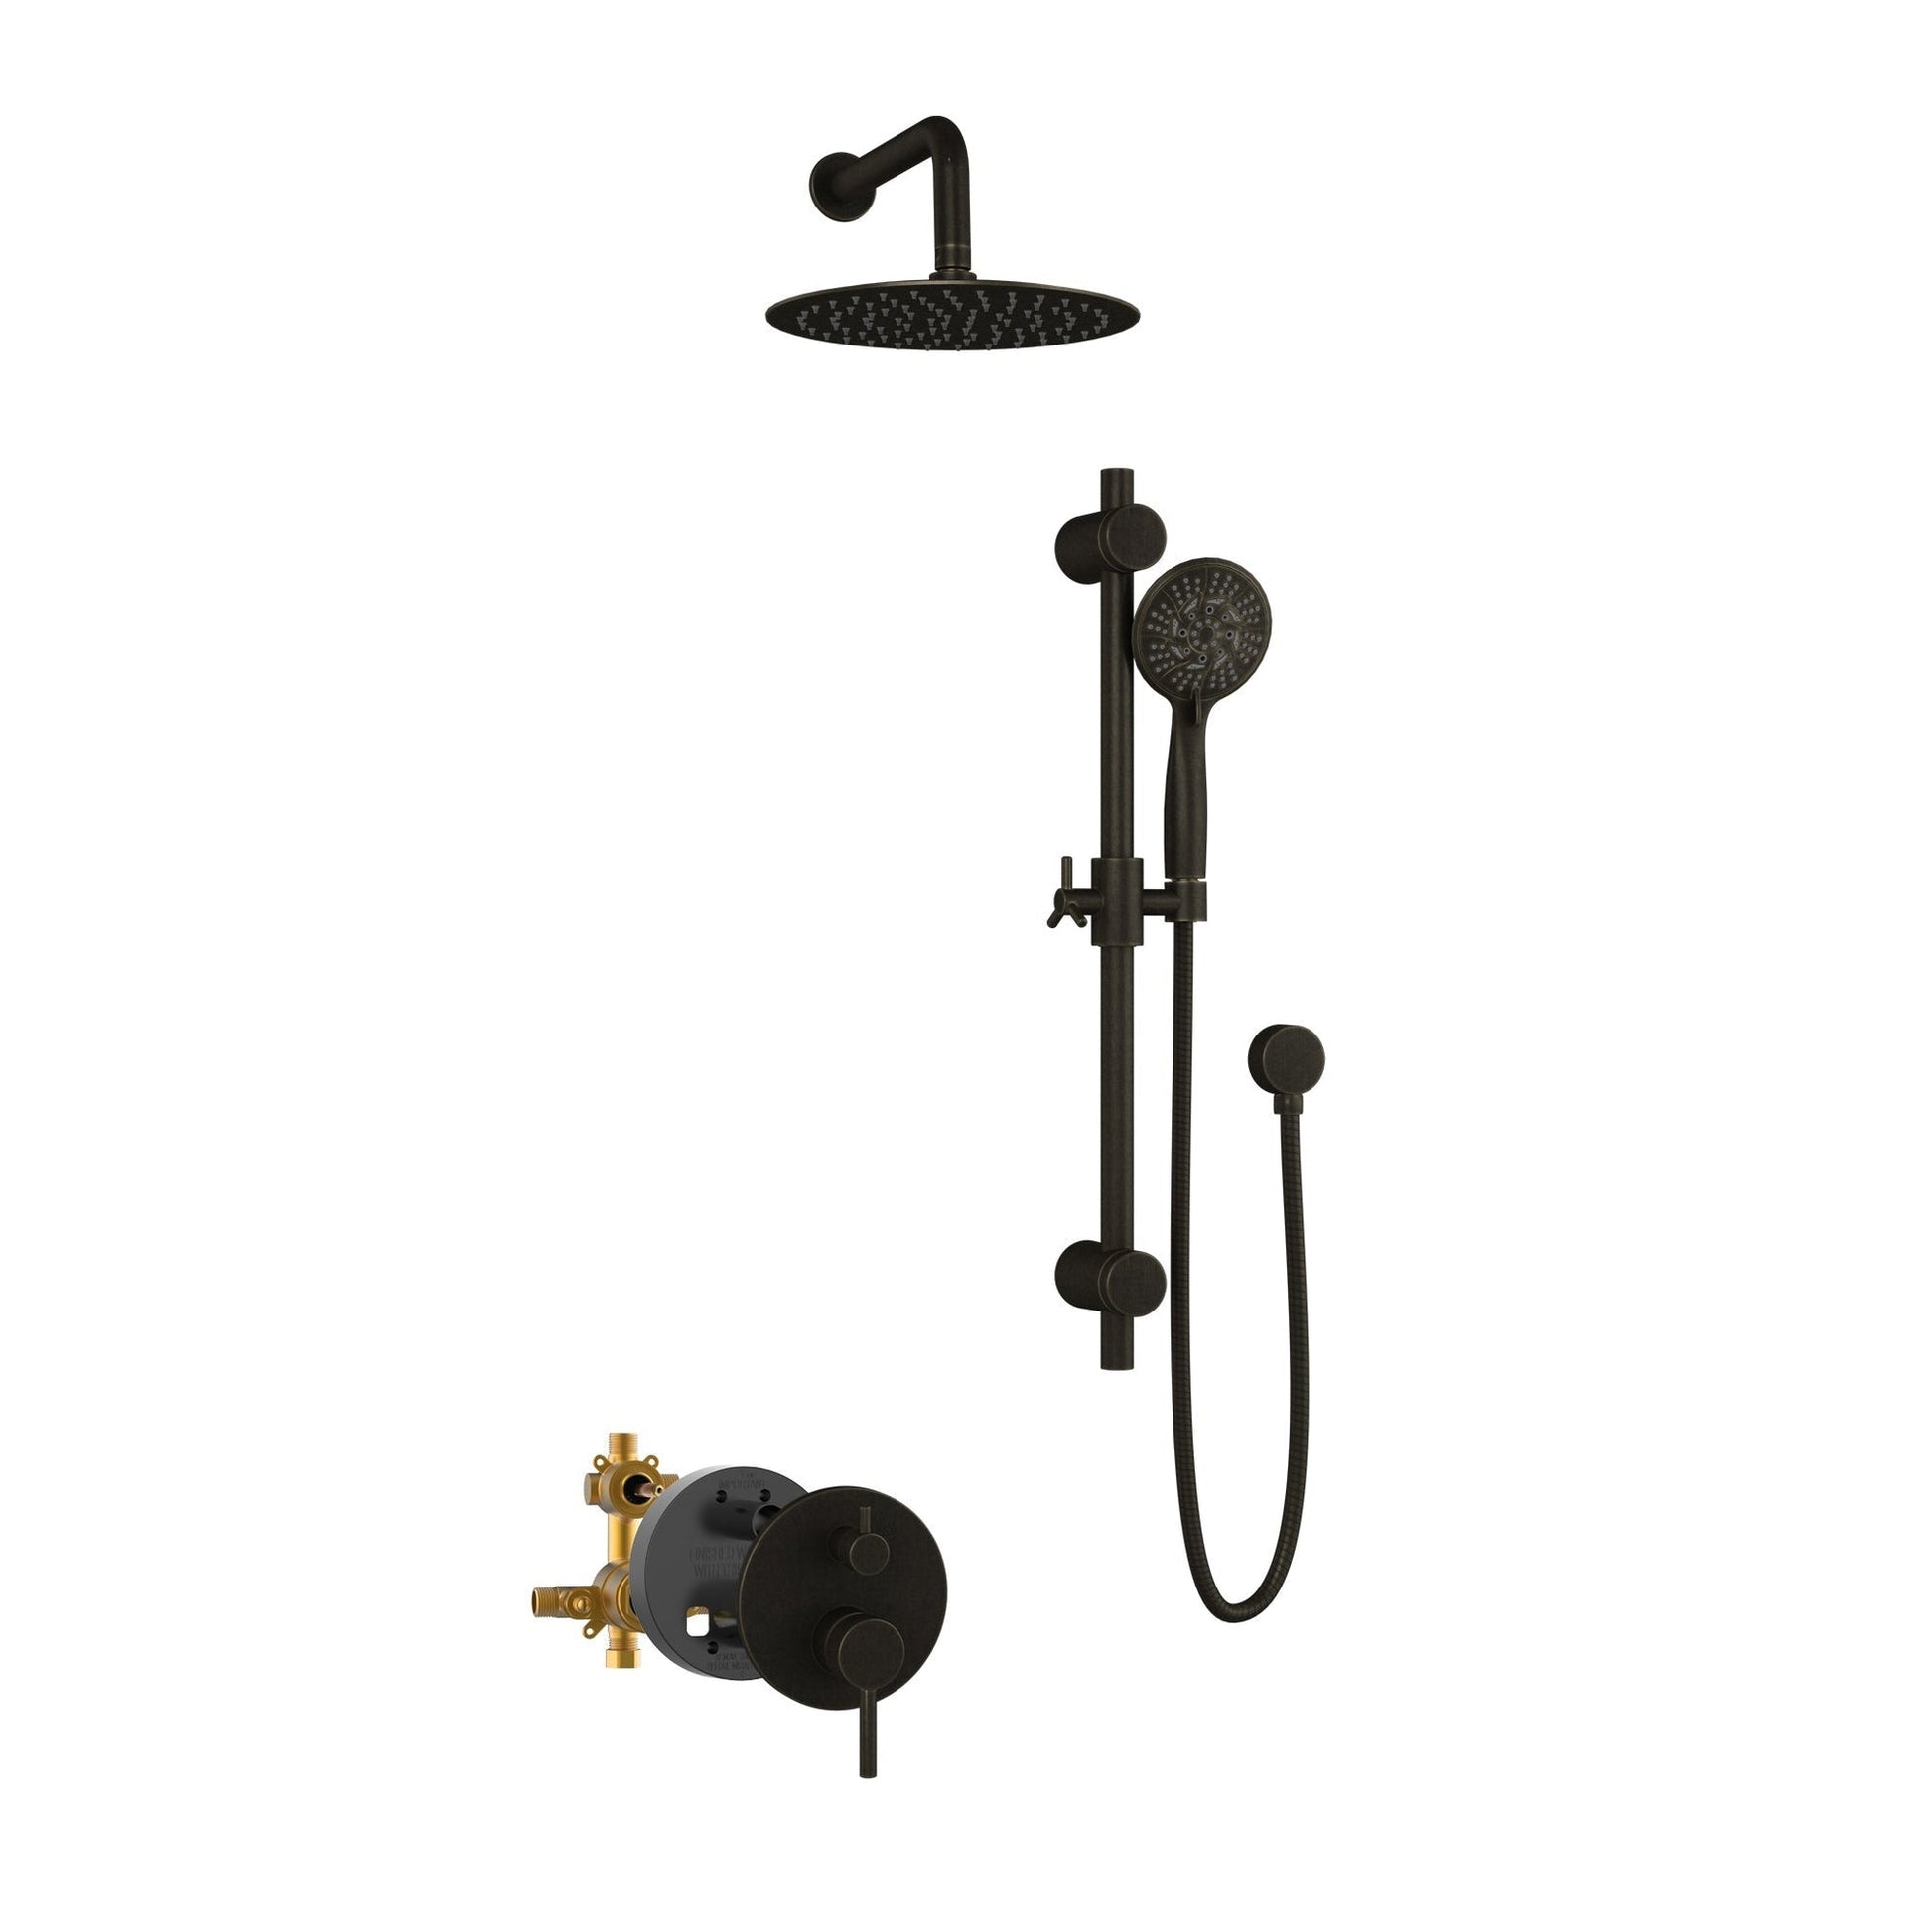 PULSE ShowerSpas Refuge Rain Shower Head 5-Function Hand Shower 2.5 GPM Shower System Combo in Oil Rubbed Bronze Finish